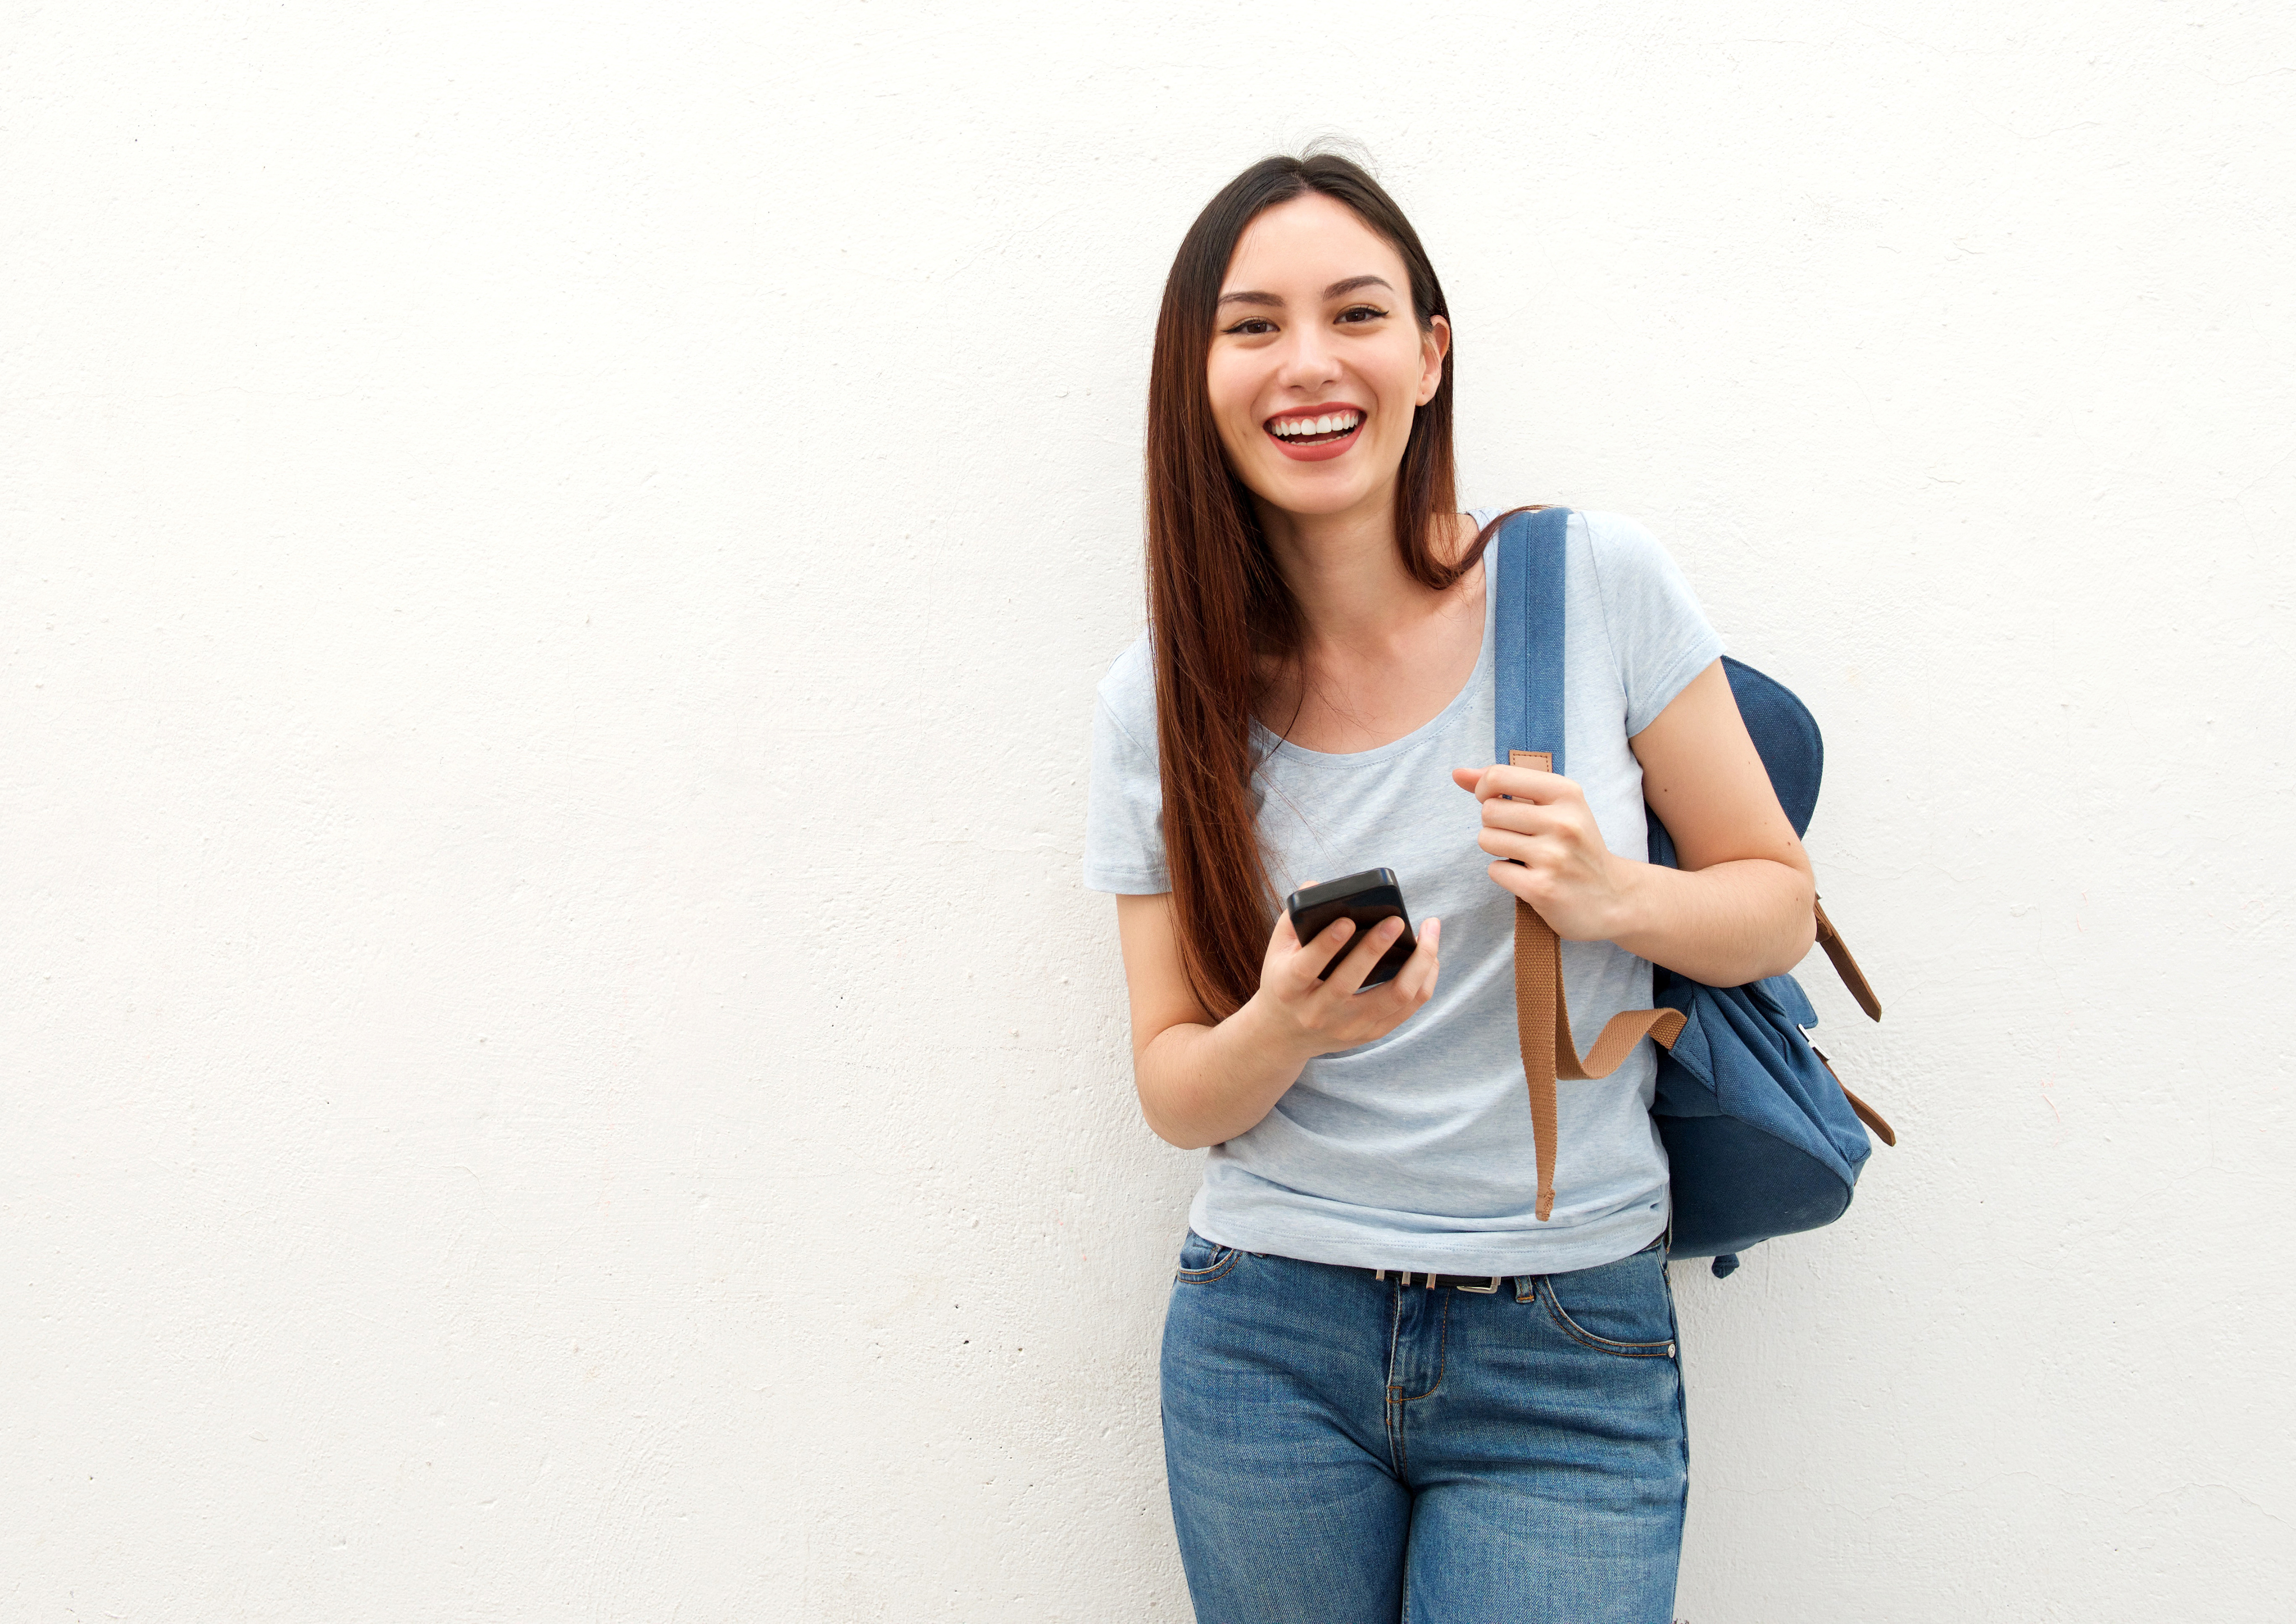 Image of a smiling female student looking at her phone